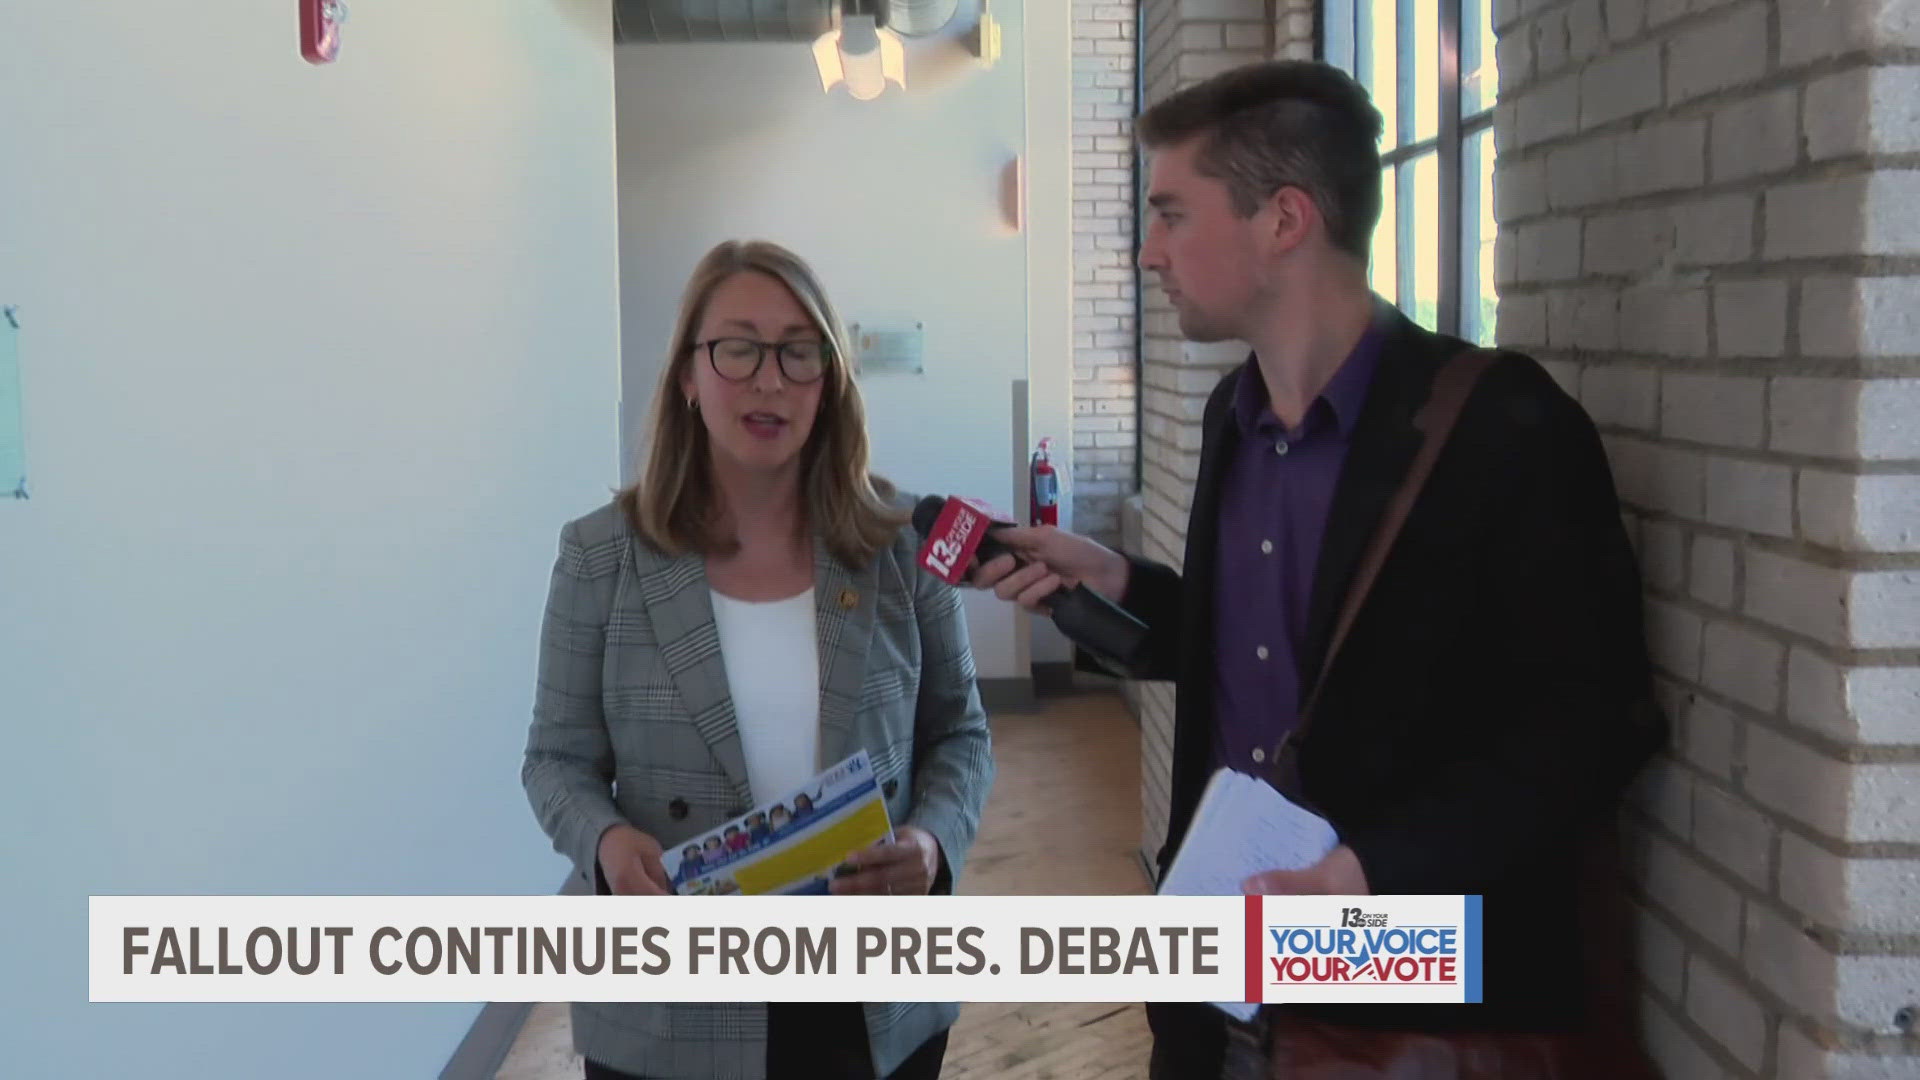 13 ON YOUR SIDE spoke with Michigan leaders about what the results of the debate could mean going forward.